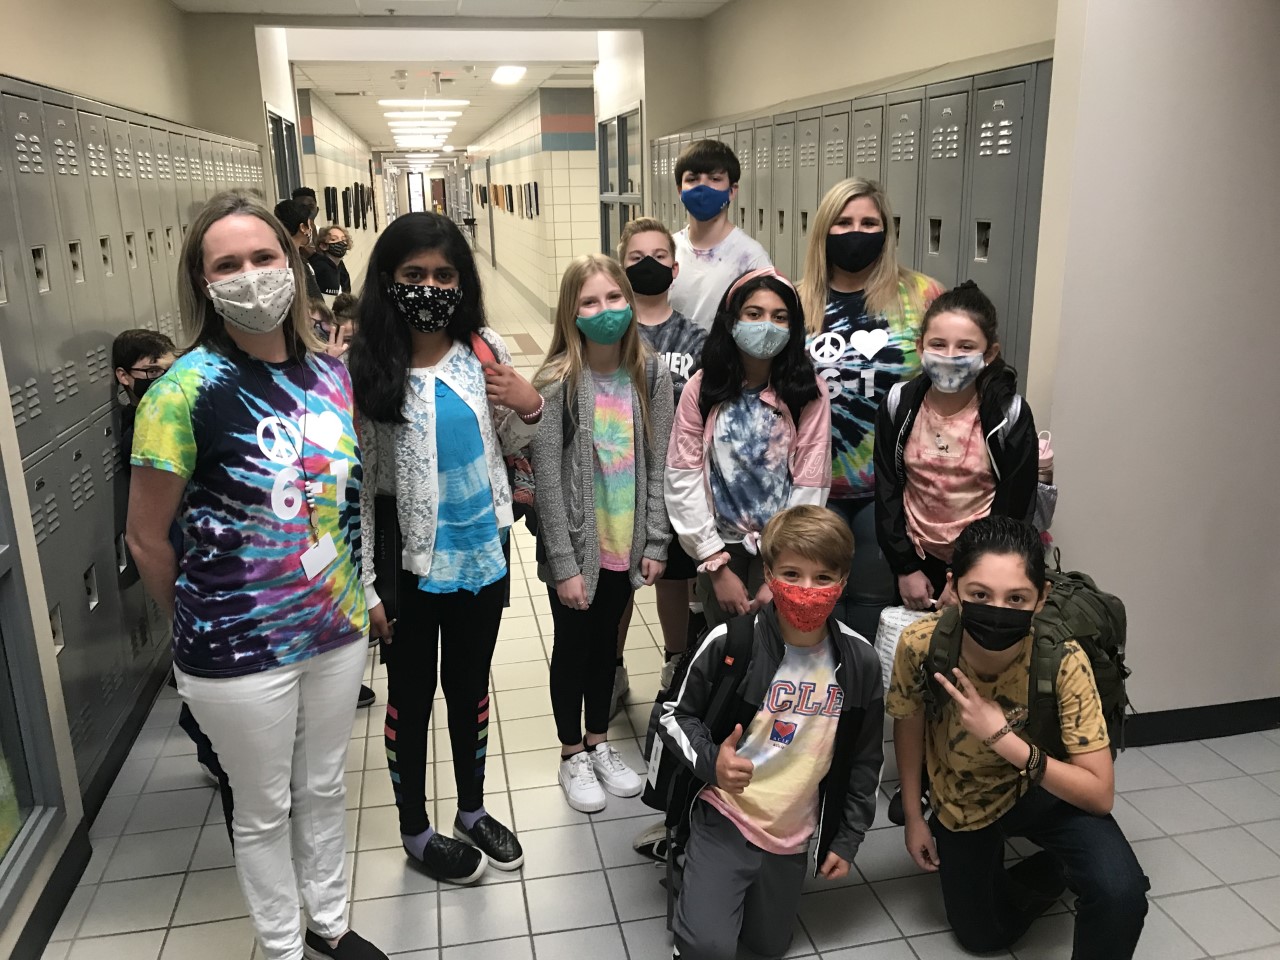 Students and Teachers smile for the camera while wearing tie-dye